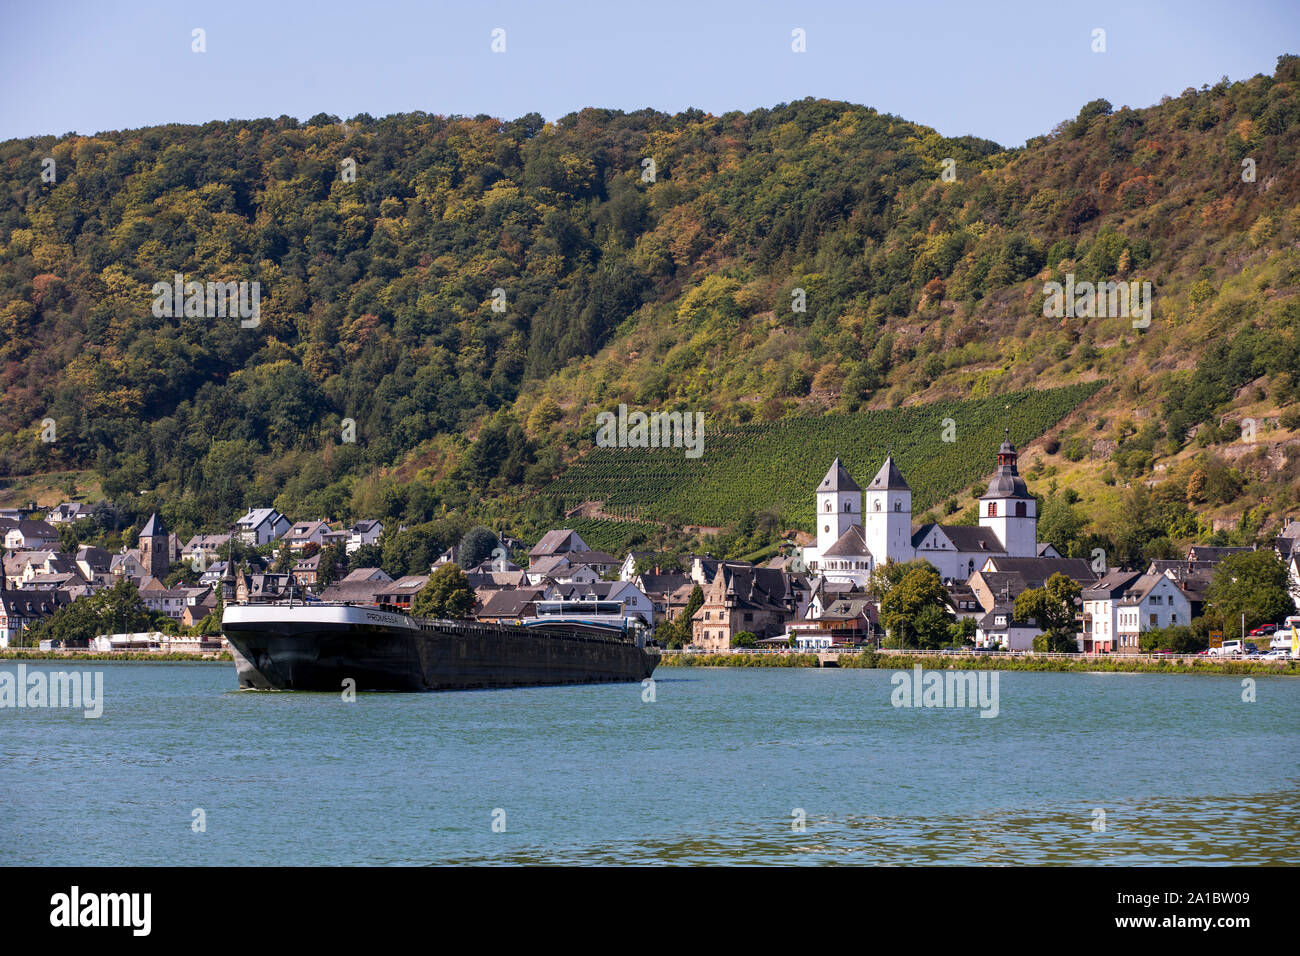 The place Treis-Kaden, district Kaden at the Mosel, Lower Moselle, , church St. Castor, Stock Photo